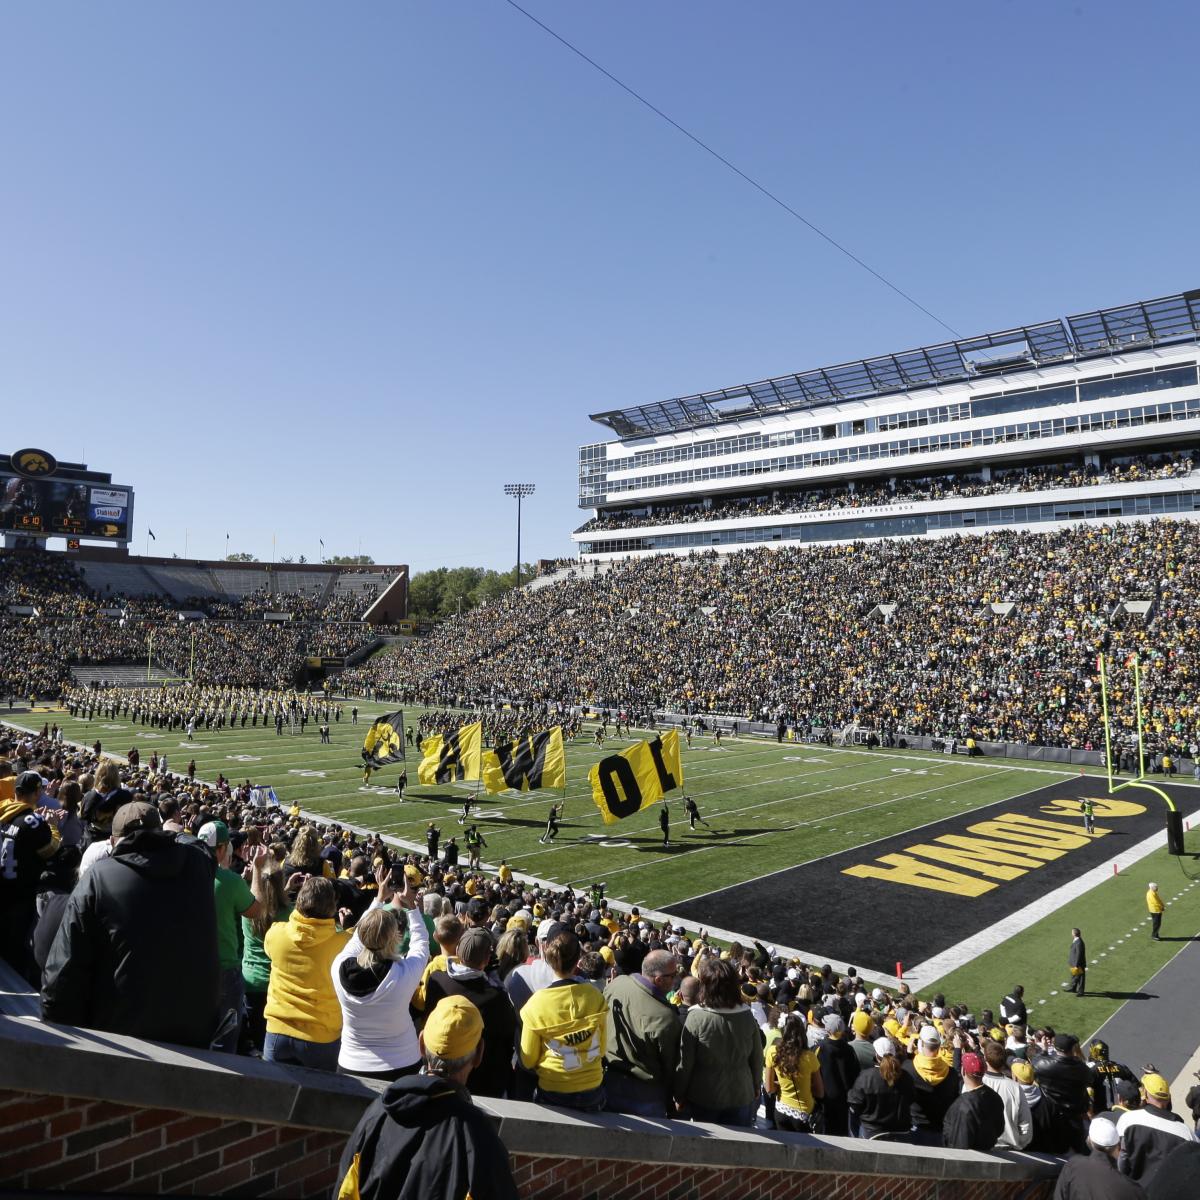 Iowa Will Give 5 Students Scholarships for Buying Football Season